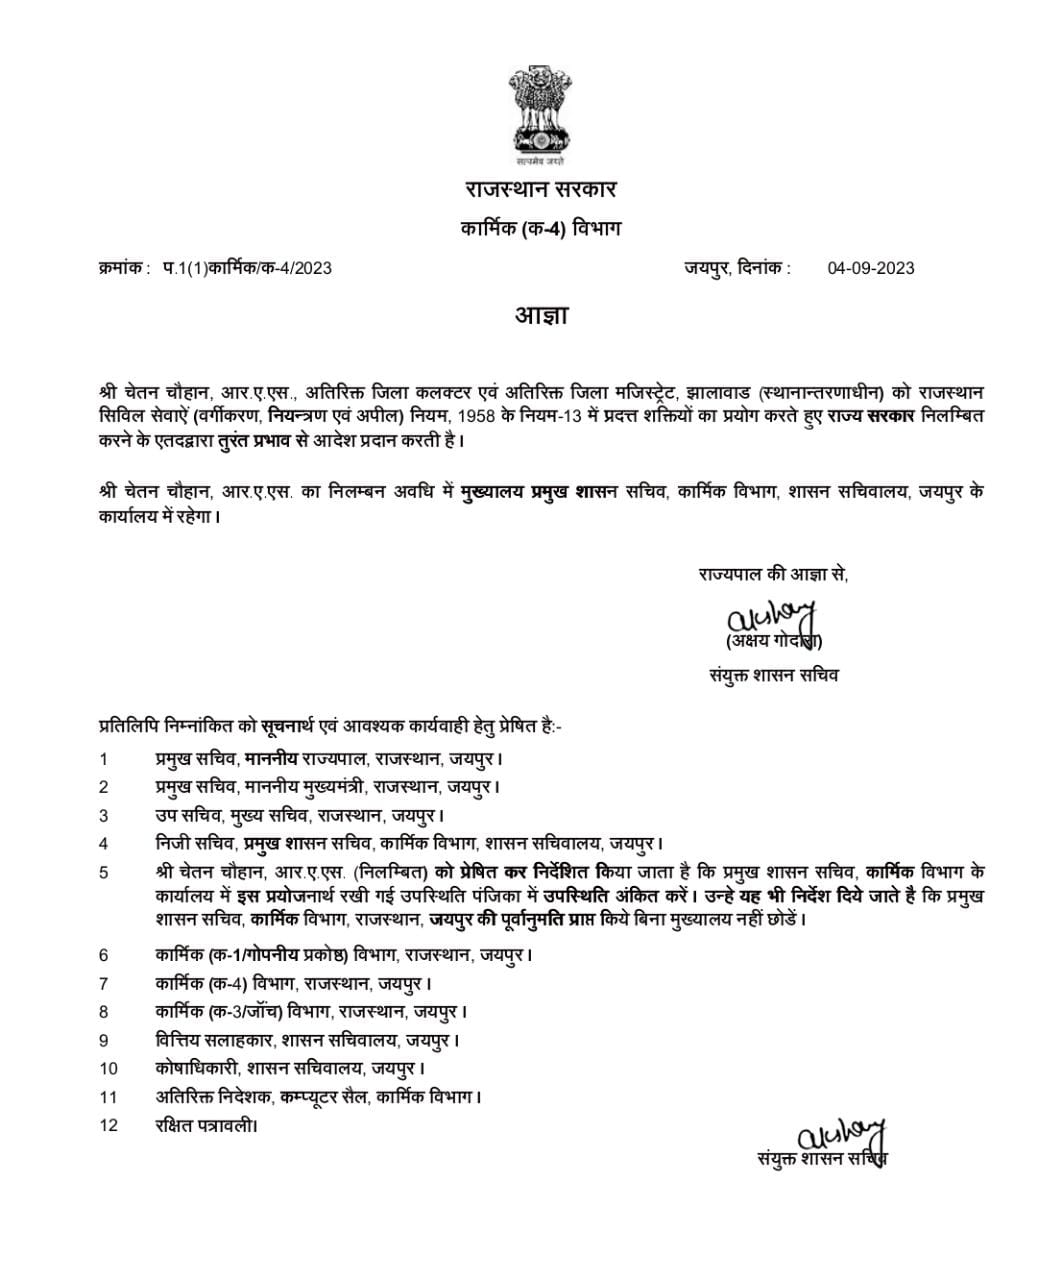 one RAS officer suspended by state government